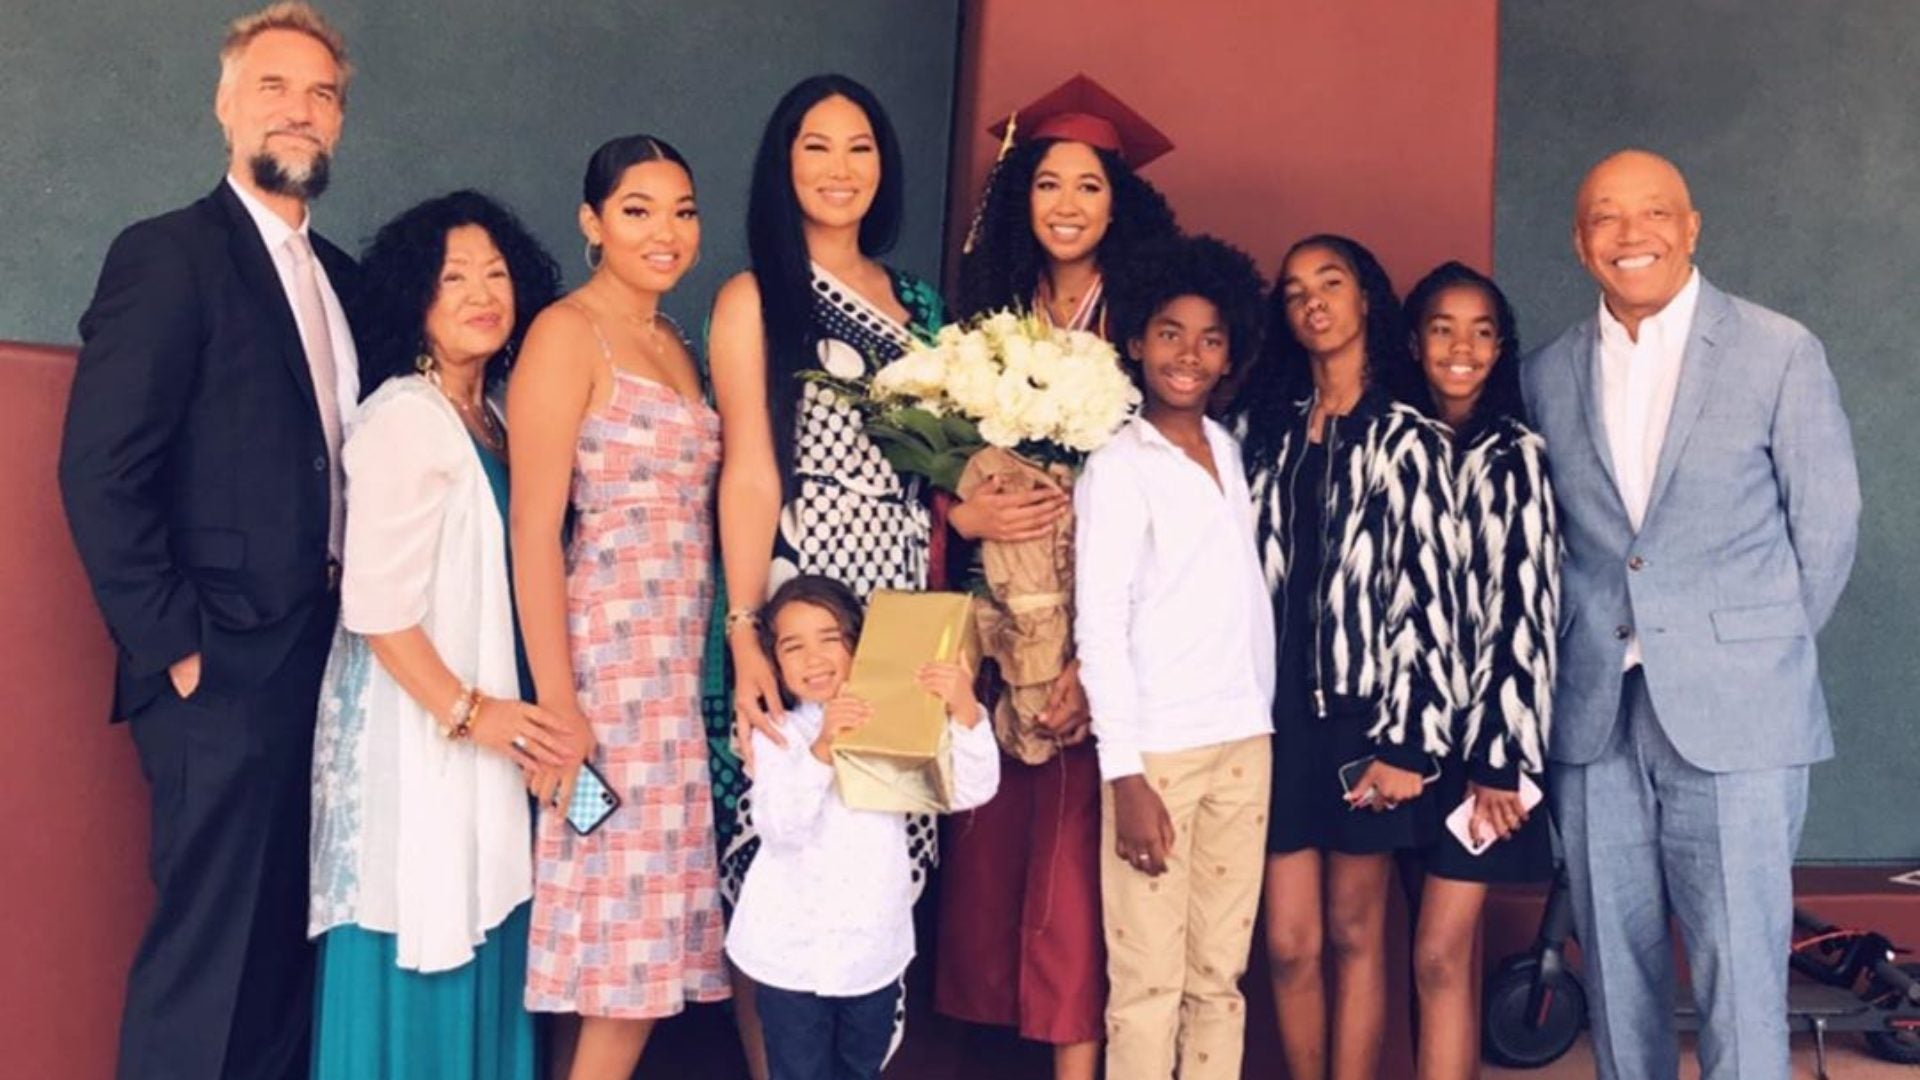 Aoki Lee Simmons Is Having The Best Week Ever! See Her Cute Prom And Graduation Photos